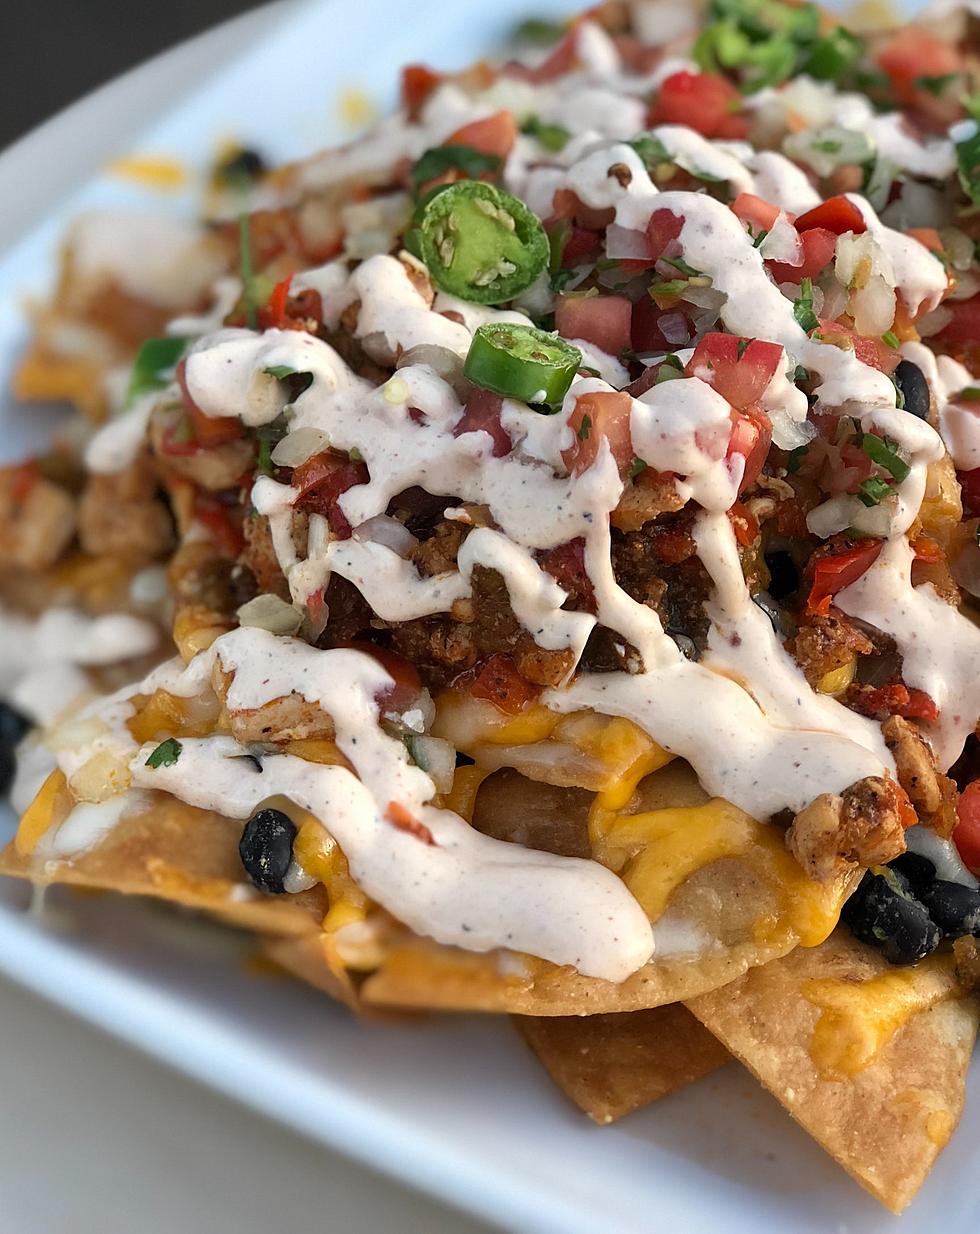 Why Can’t I Find Good Nachos In Central Minnesota?